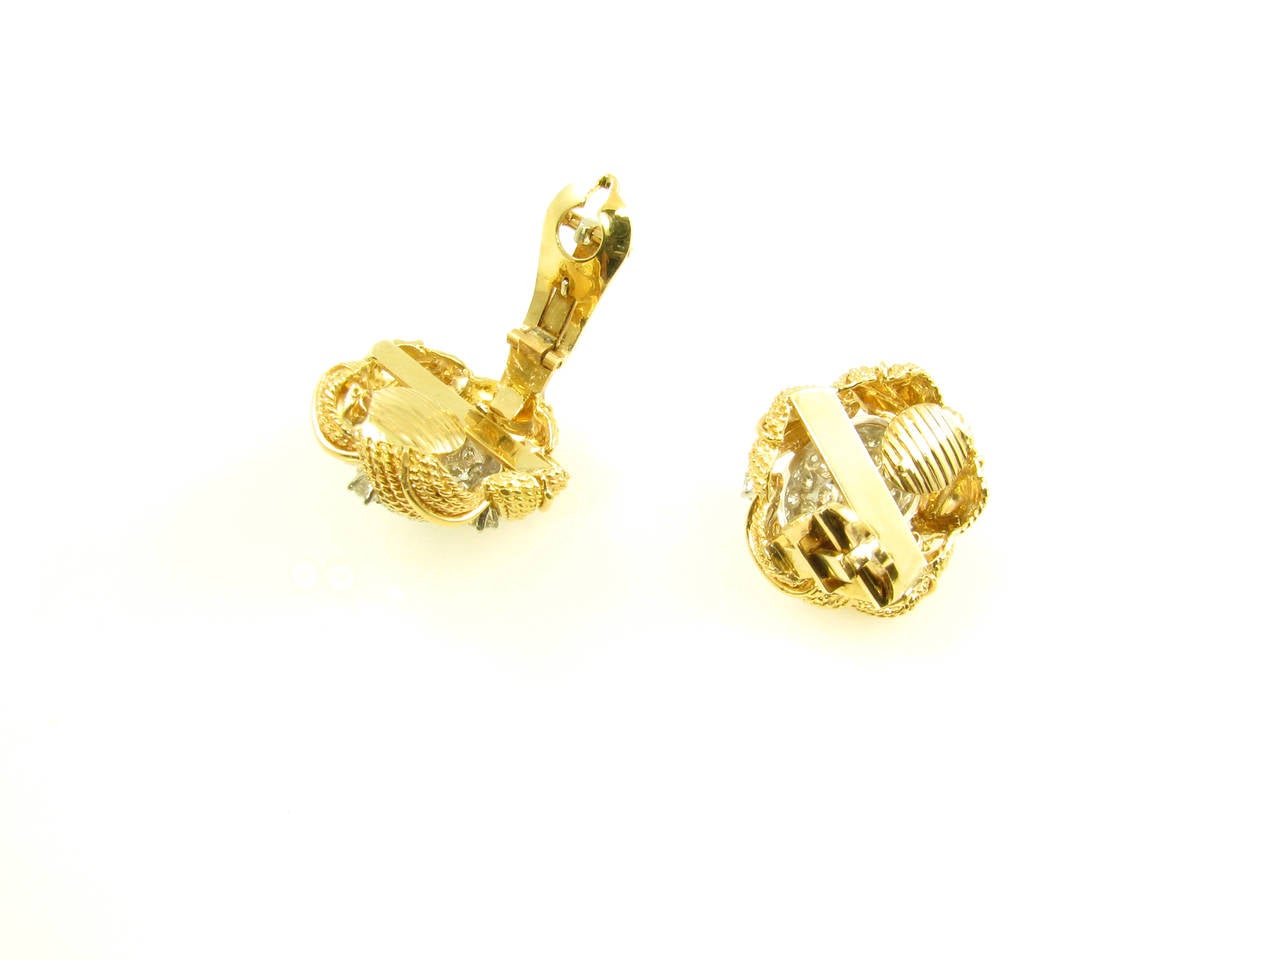 A pair of 18 karat yellow gold, platinum and diamond earrings, Circa 1960.  The earrings are designed with an oval pave diamond set platinum dome in the center, with 5 prong set diamonds set between the 5 yellow gold rope style leaf frame.  The